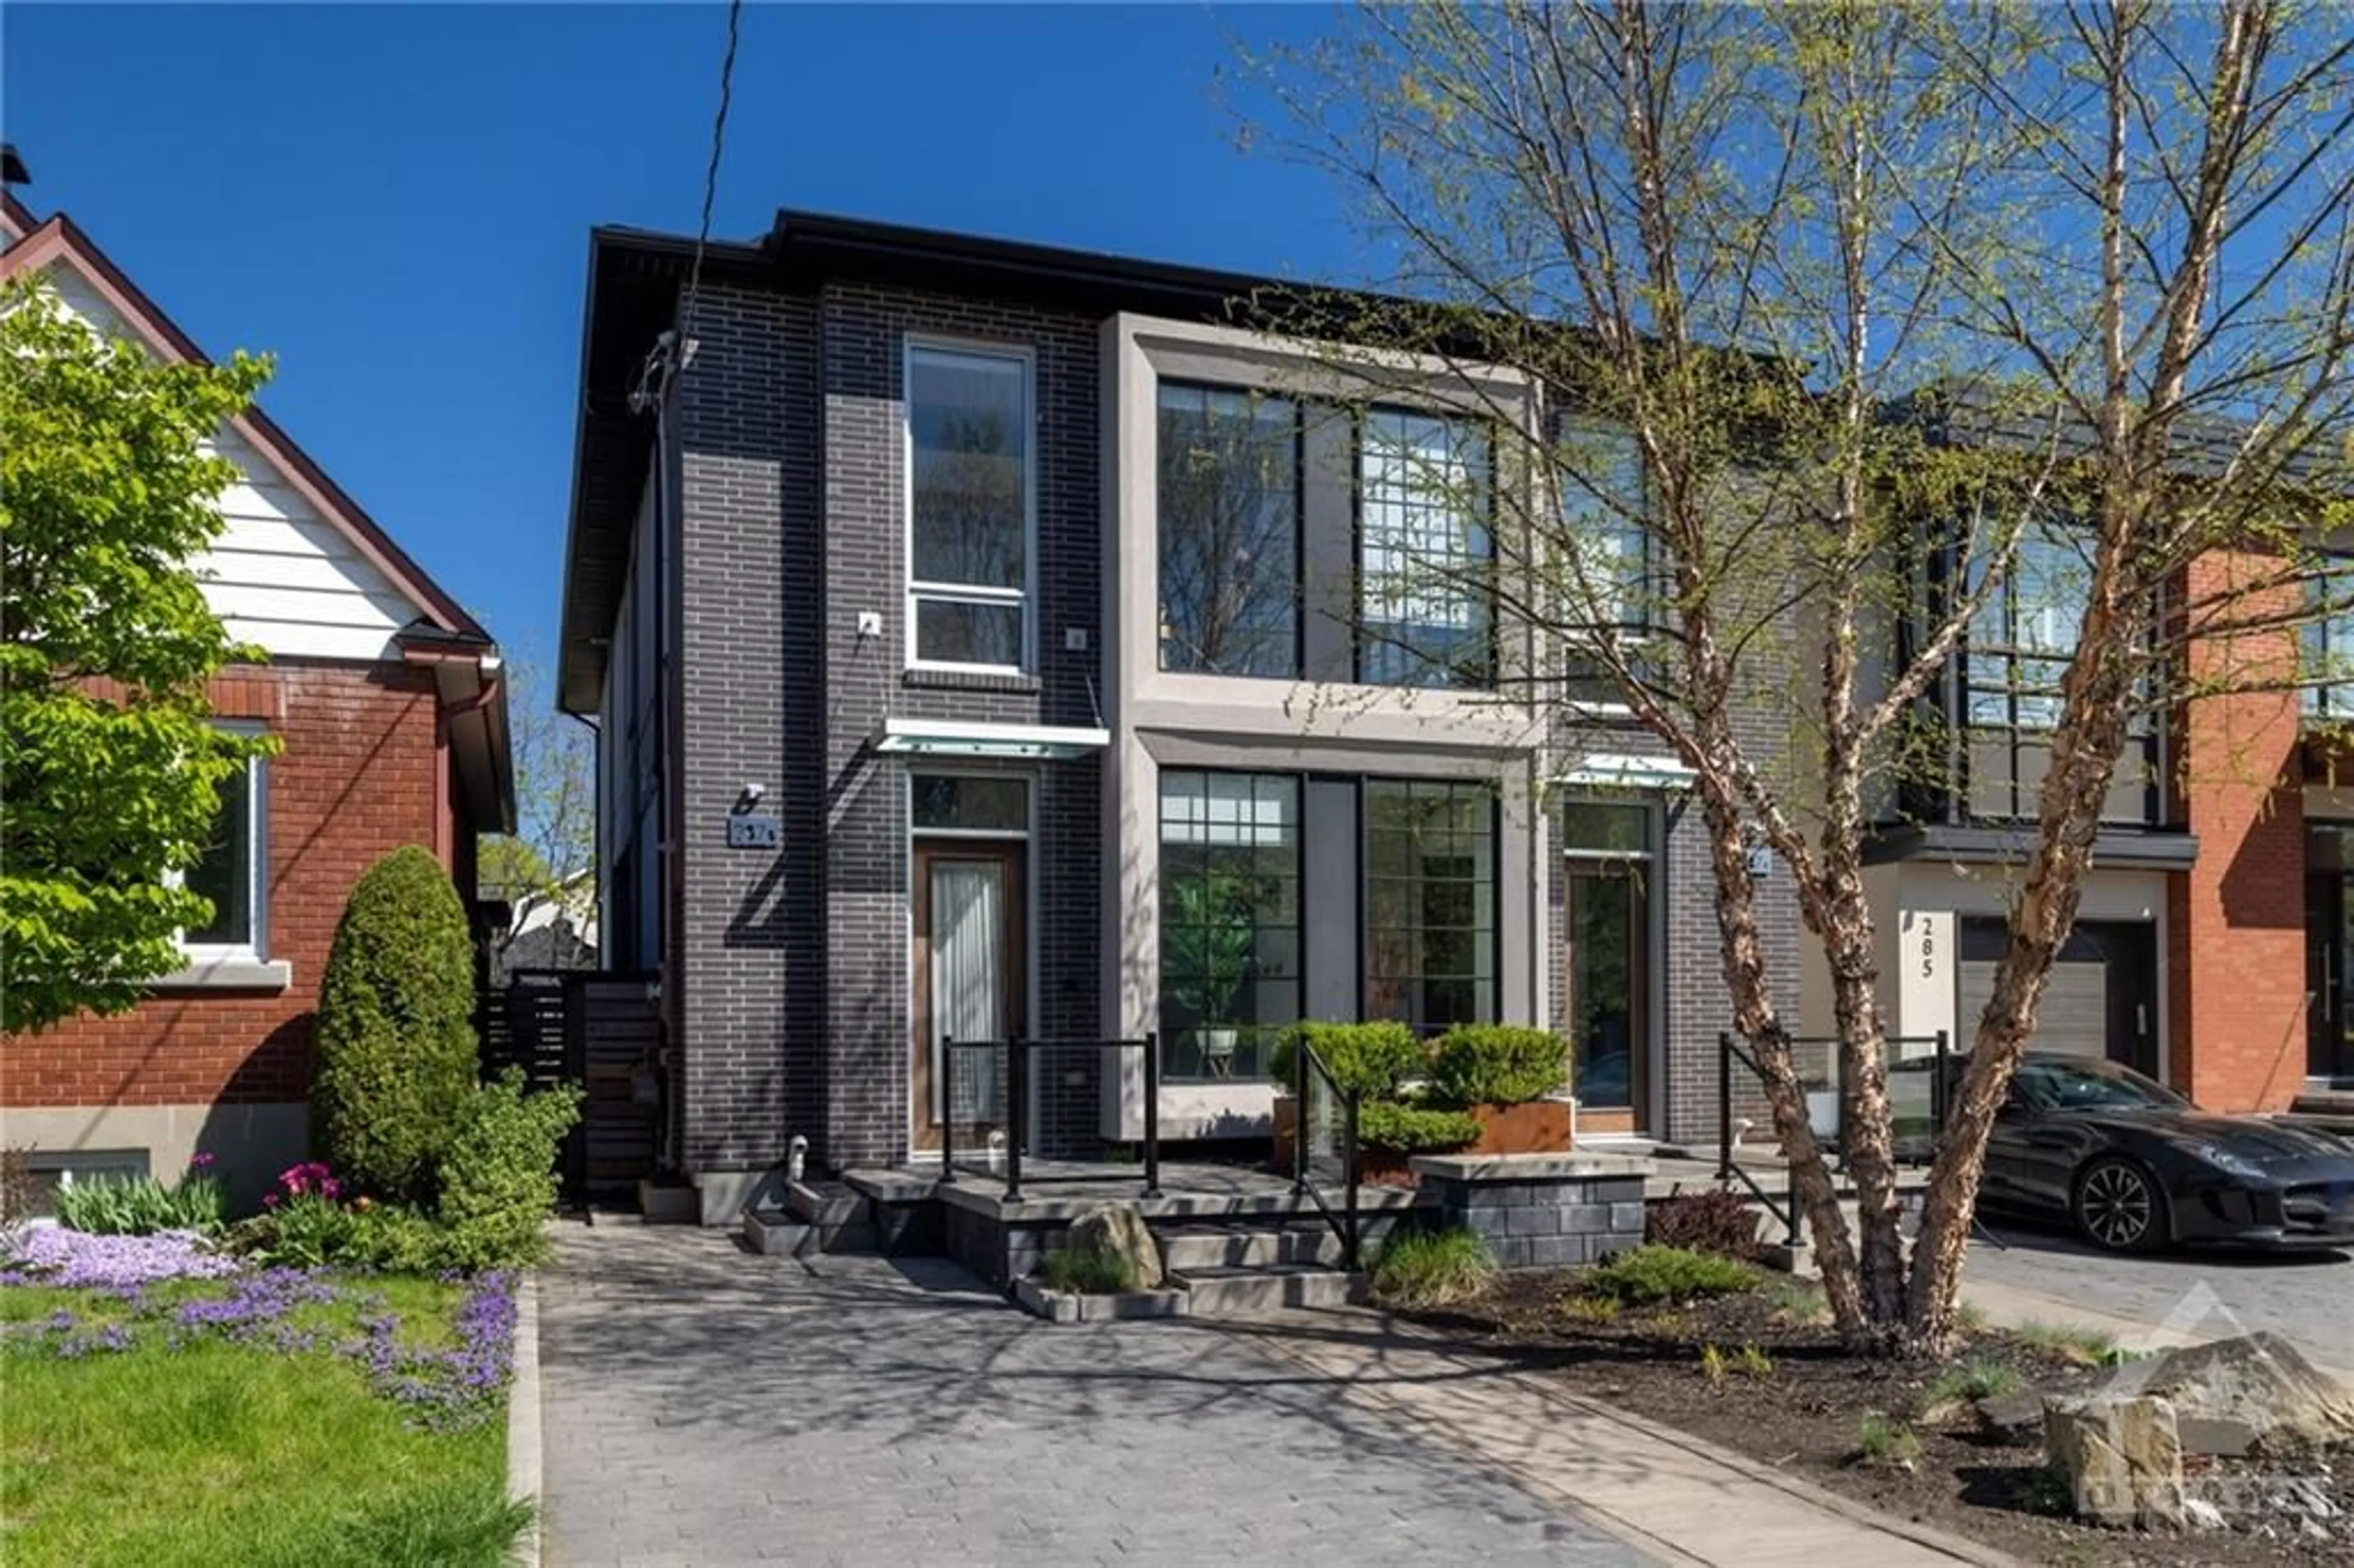 Home with brick exterior material for 287 DOVERCOURT Ave #B, Ottawa Ontario K1Z 7H4